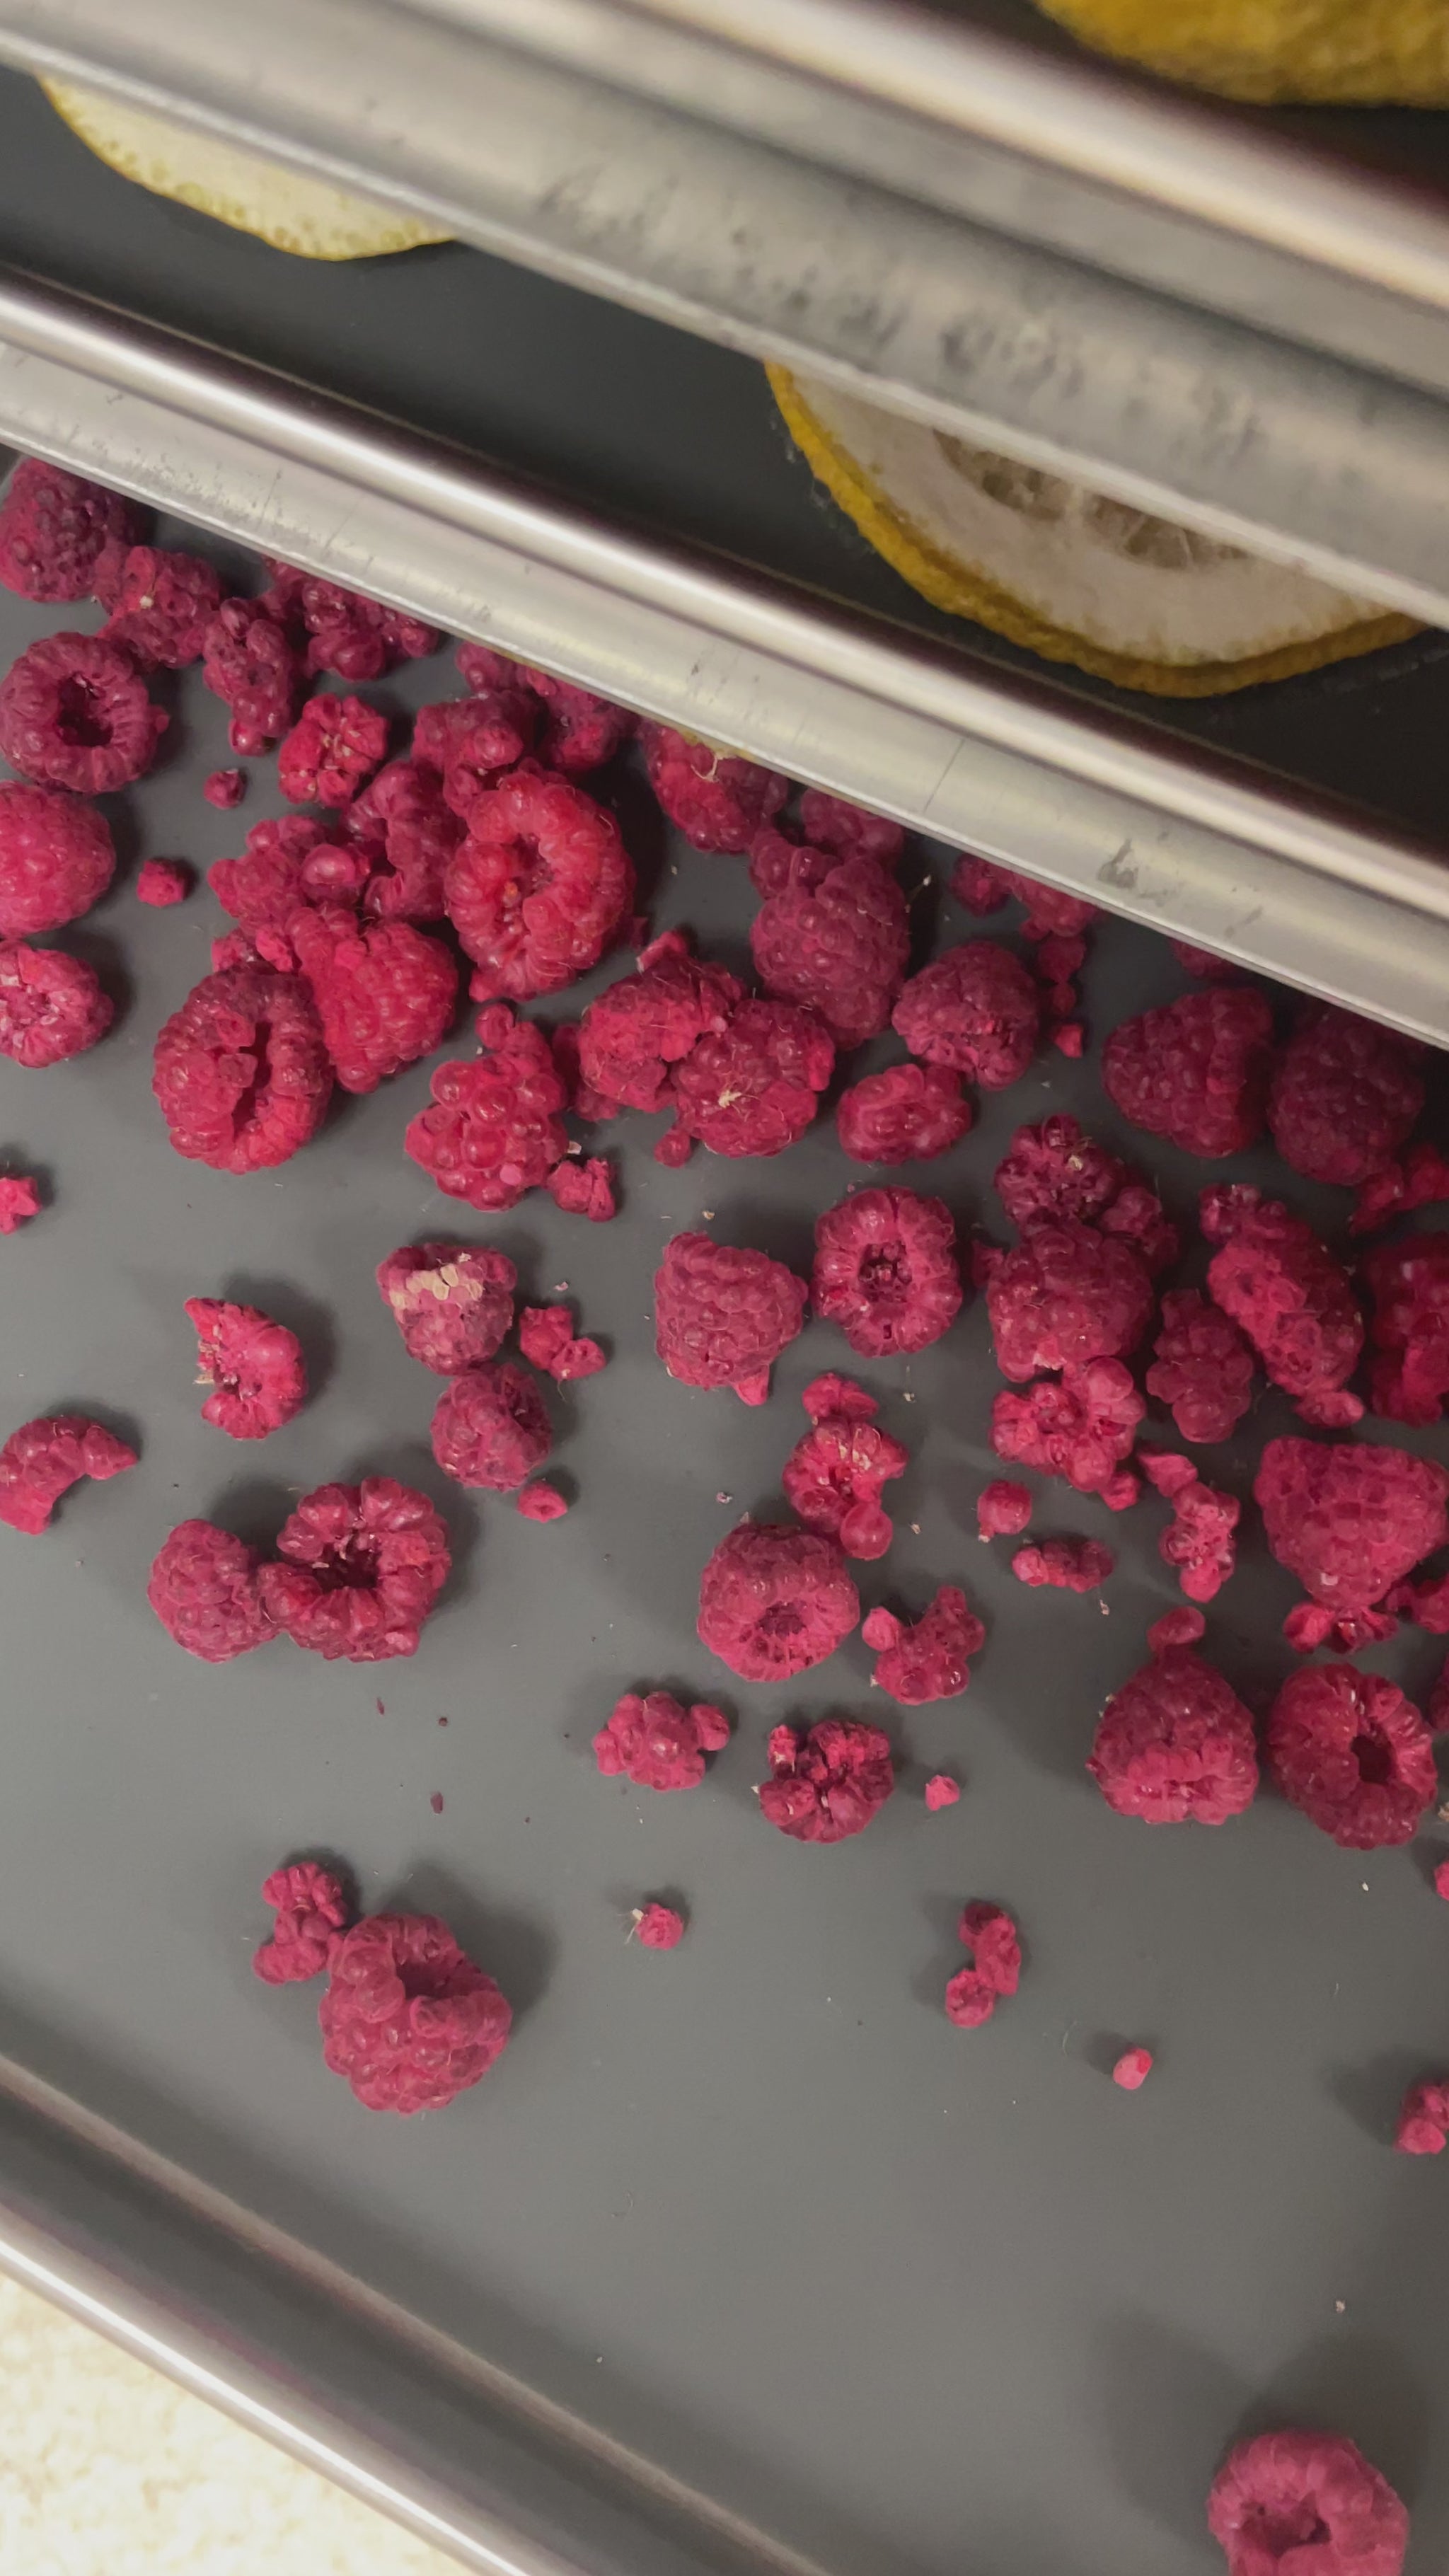 Freeze-dried raspberries on a metal sheet pan being taken out of freeze-dryer